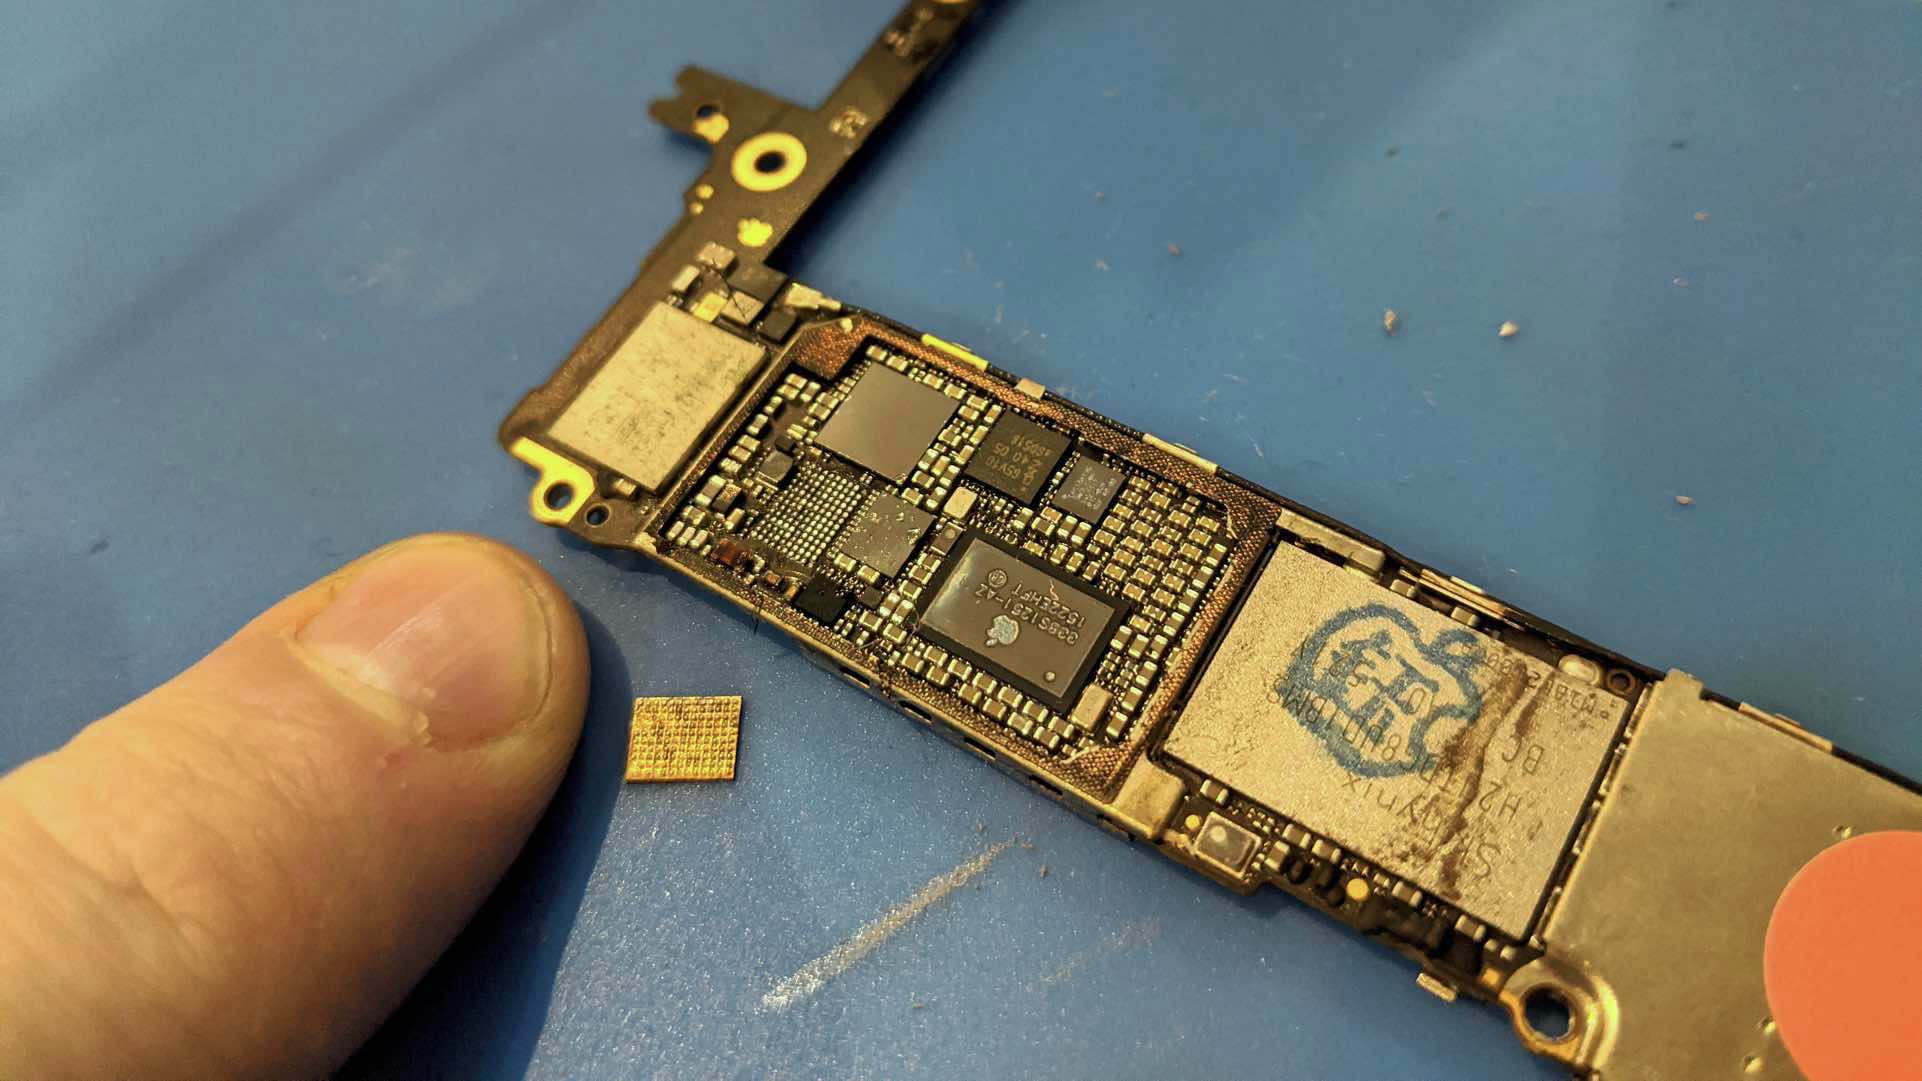 iPhone board with chip removed, next to fingernail for scale